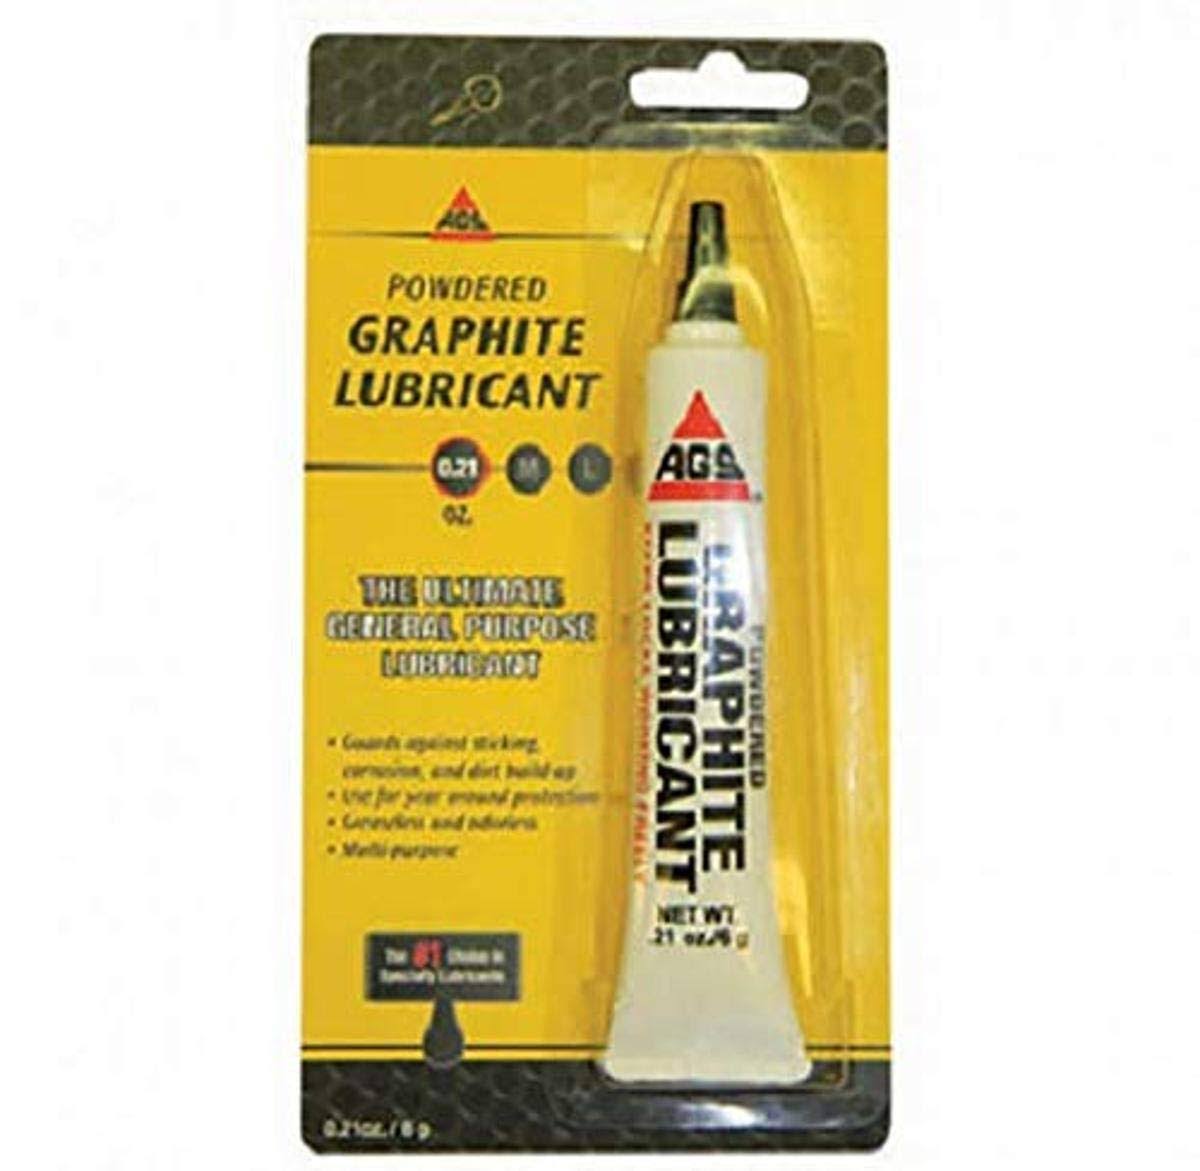 AGS Powdered Graphite Lubricant - 6g